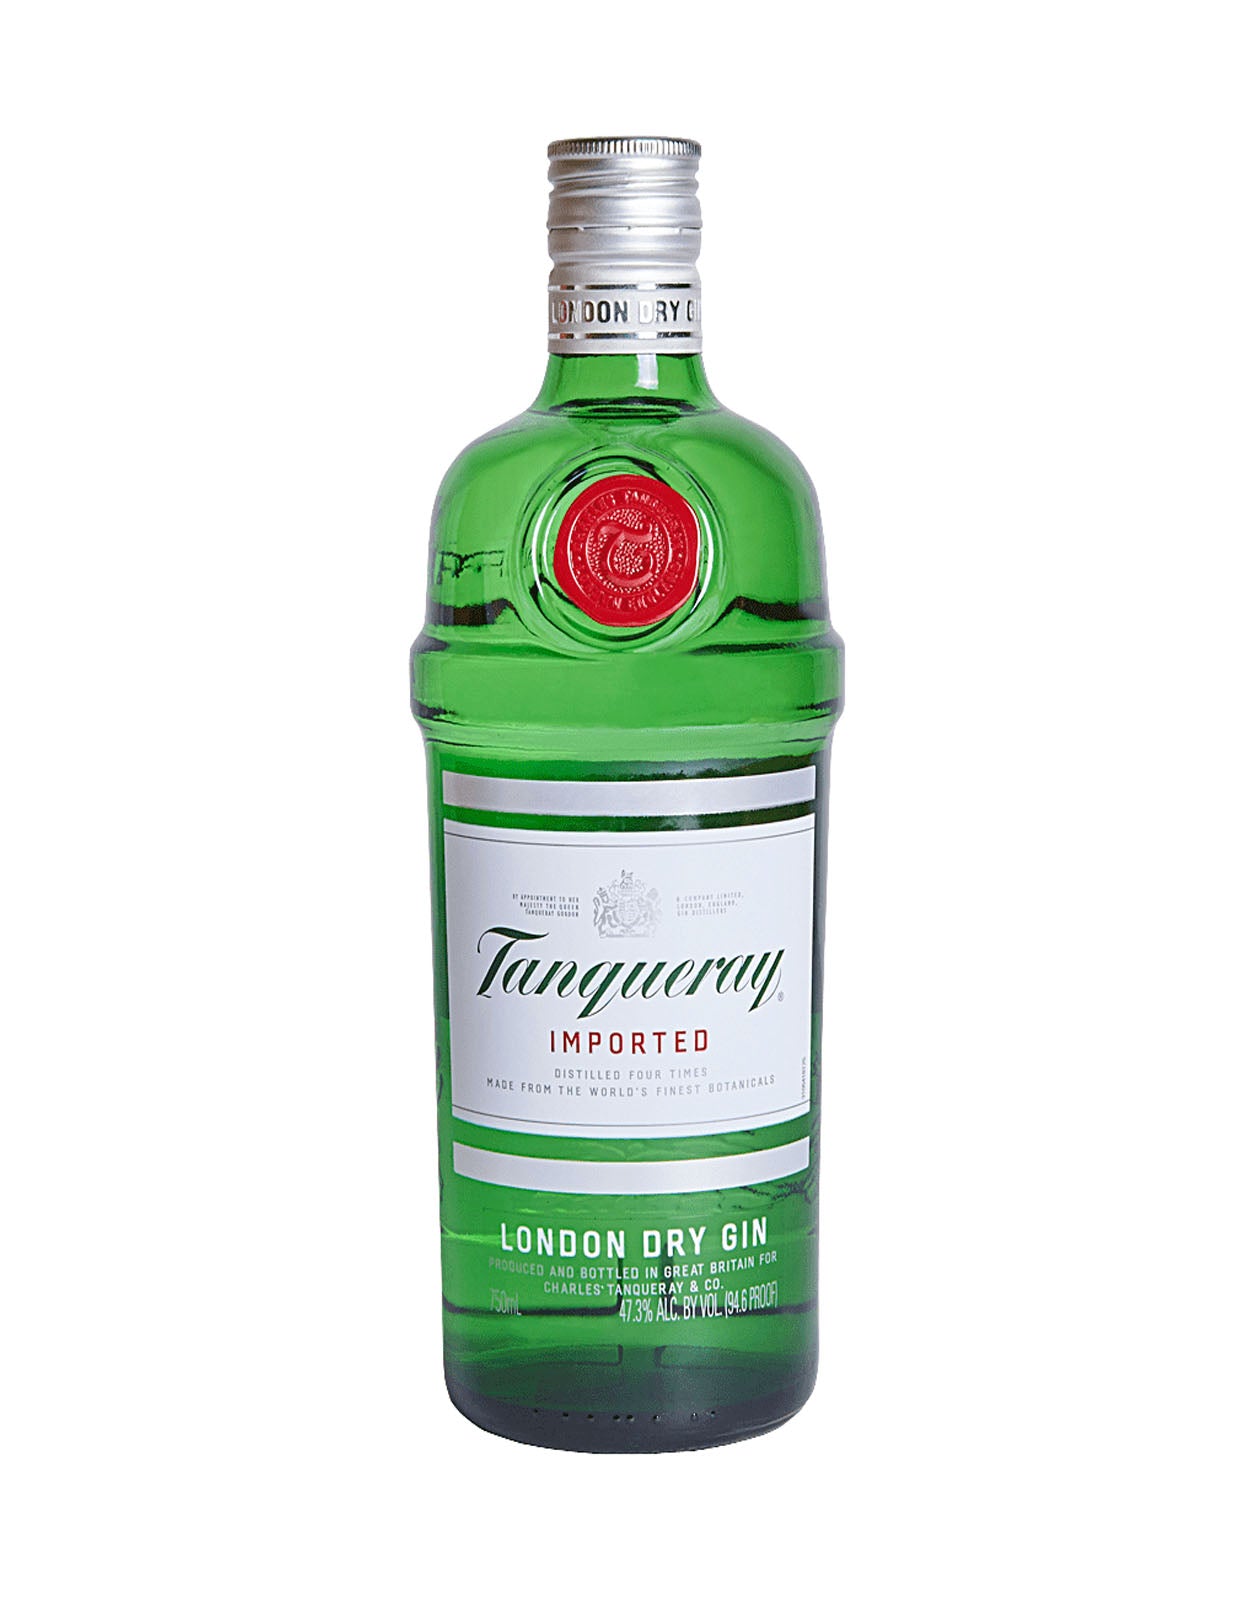 Tanqueray Gin - 1.14 Litre Bottle